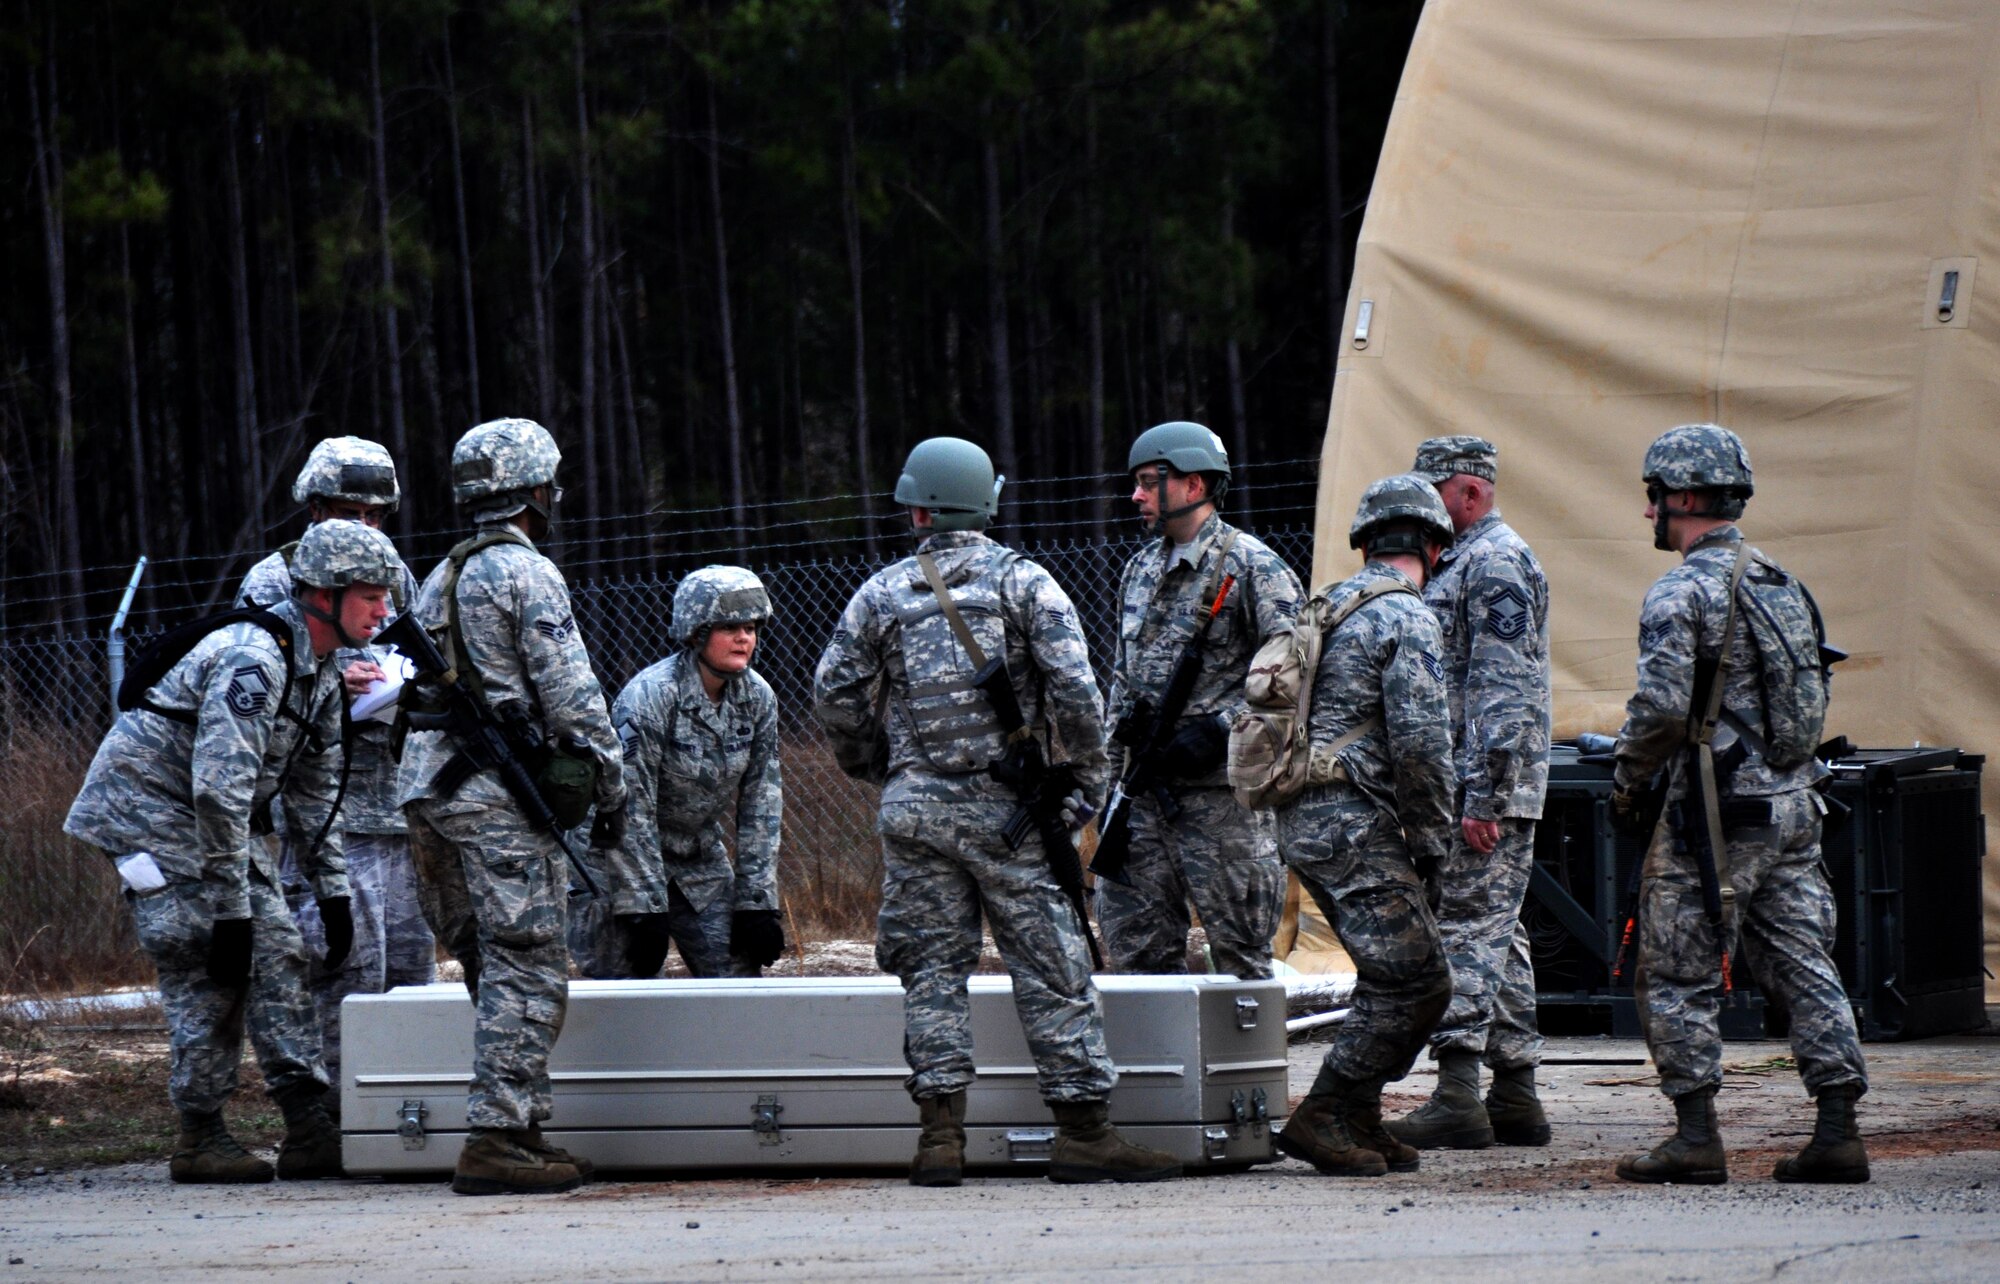 Participants in Force Support Silver Flag lower a coffin during the Readiness Challenge at Dobbins Air Reserve Base, Georgia, March 12, 2015. The challenge consisted of teams competing against each other in nine different events ranging from following a convoy, building tents, fixing Babington burners, cooking meals, planning lodging, planning a base from scratch, driving a forklift and a scavenger hunt.  (U.S. Air Force photo/Senior Airman Daniel Phelps)